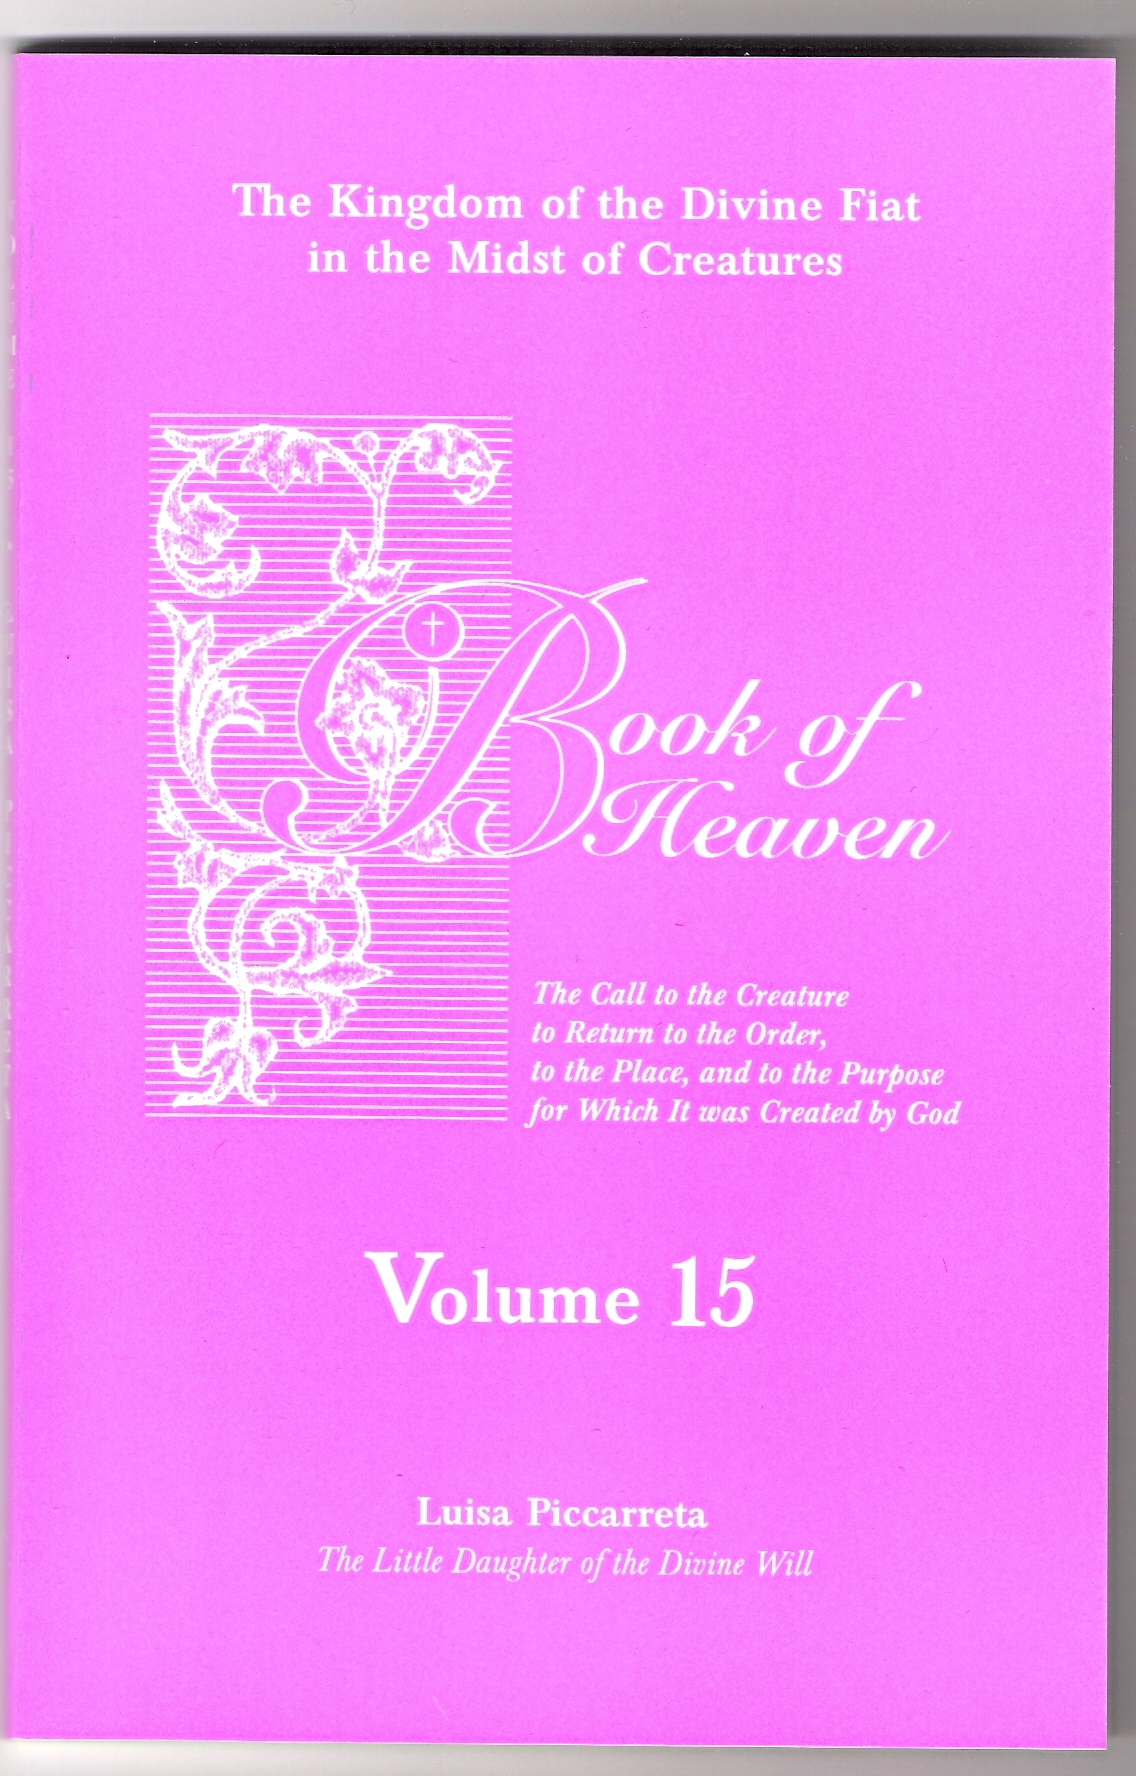 Volume #15 of the Book of Heaven by Luisa